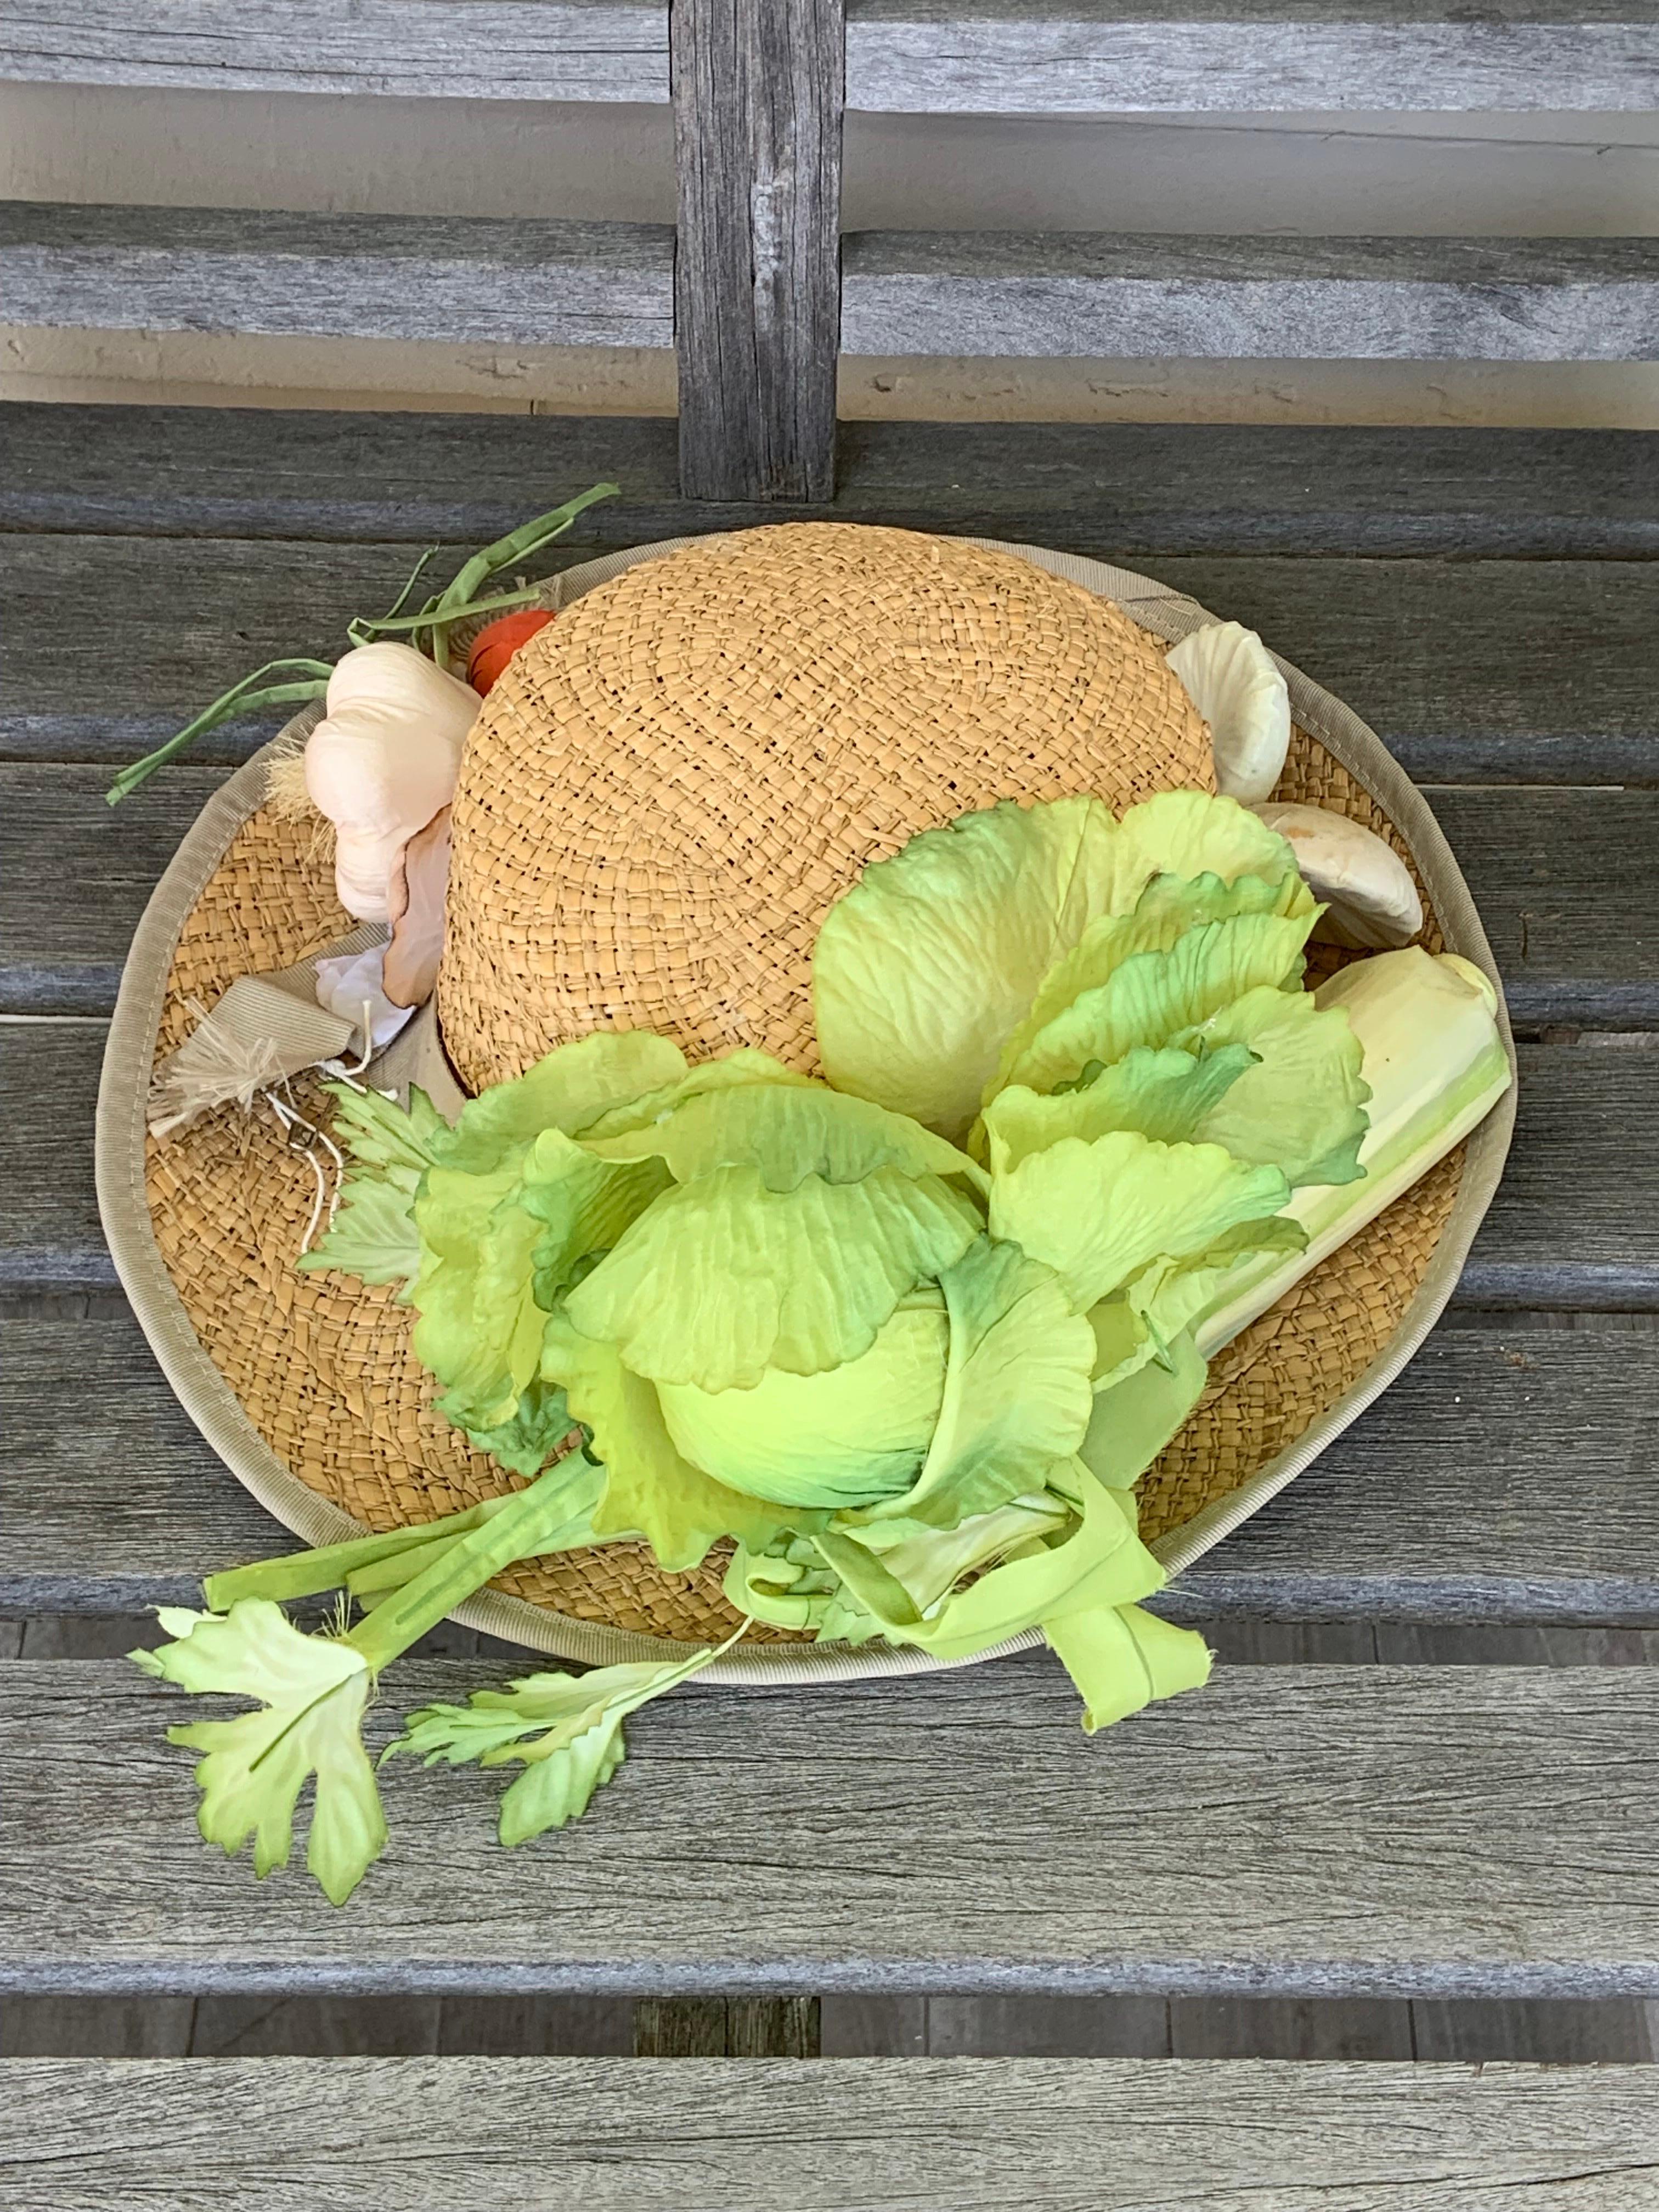 This silk vegetable decorated straw hat is perfect for a vegetarian, a vegetable gardener or someone who seeks the unusual.  Retailed by Bloomingdale's the brim of the Italian made straw hat is decorated with a head of Boston lettuce at the center